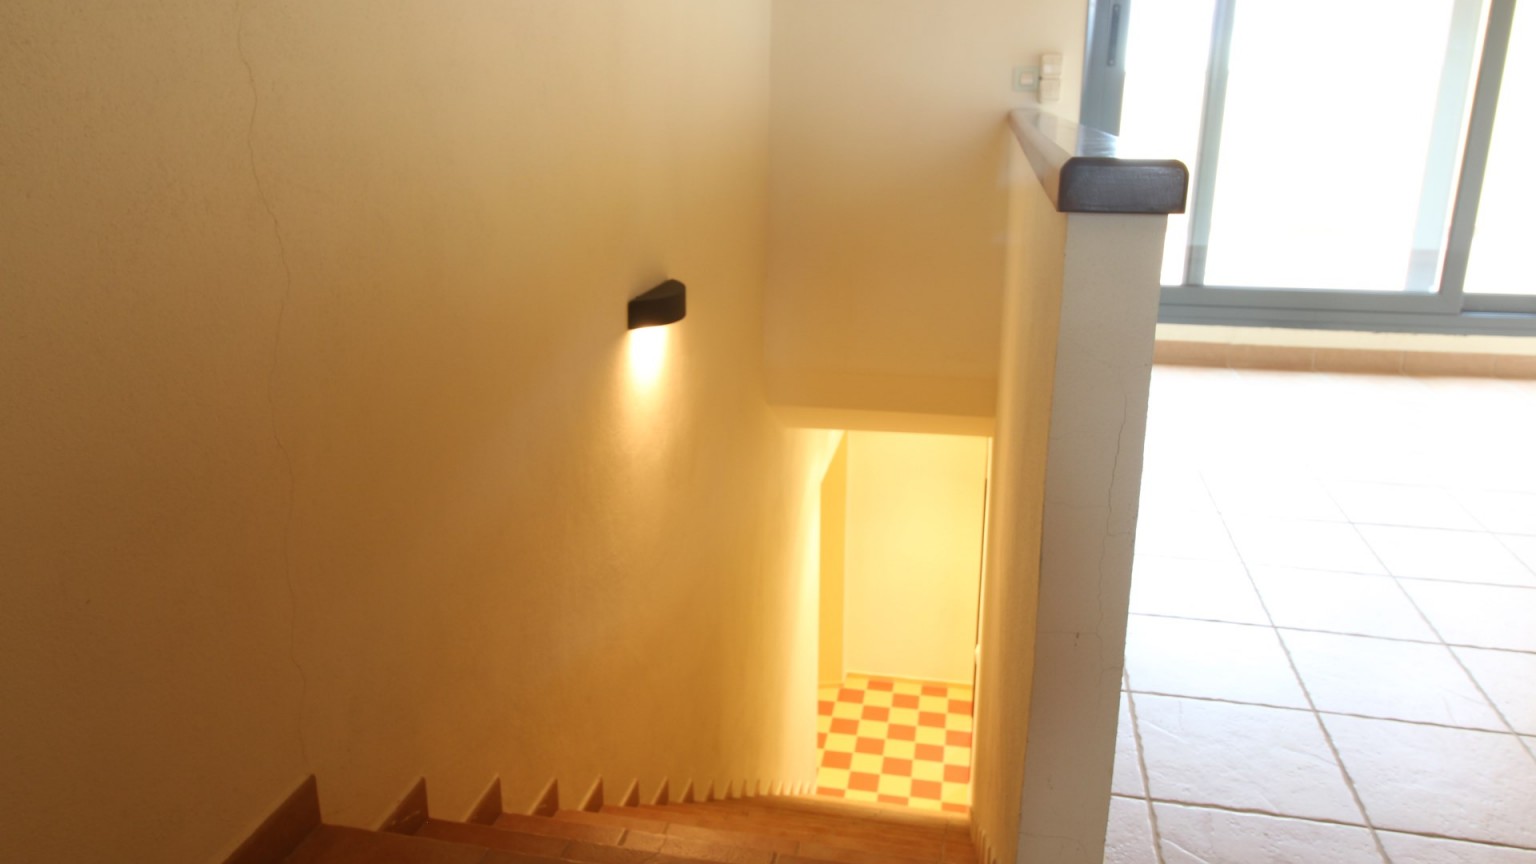 Duplex for sale, 3 bedrooms with parking space in Garriguella.